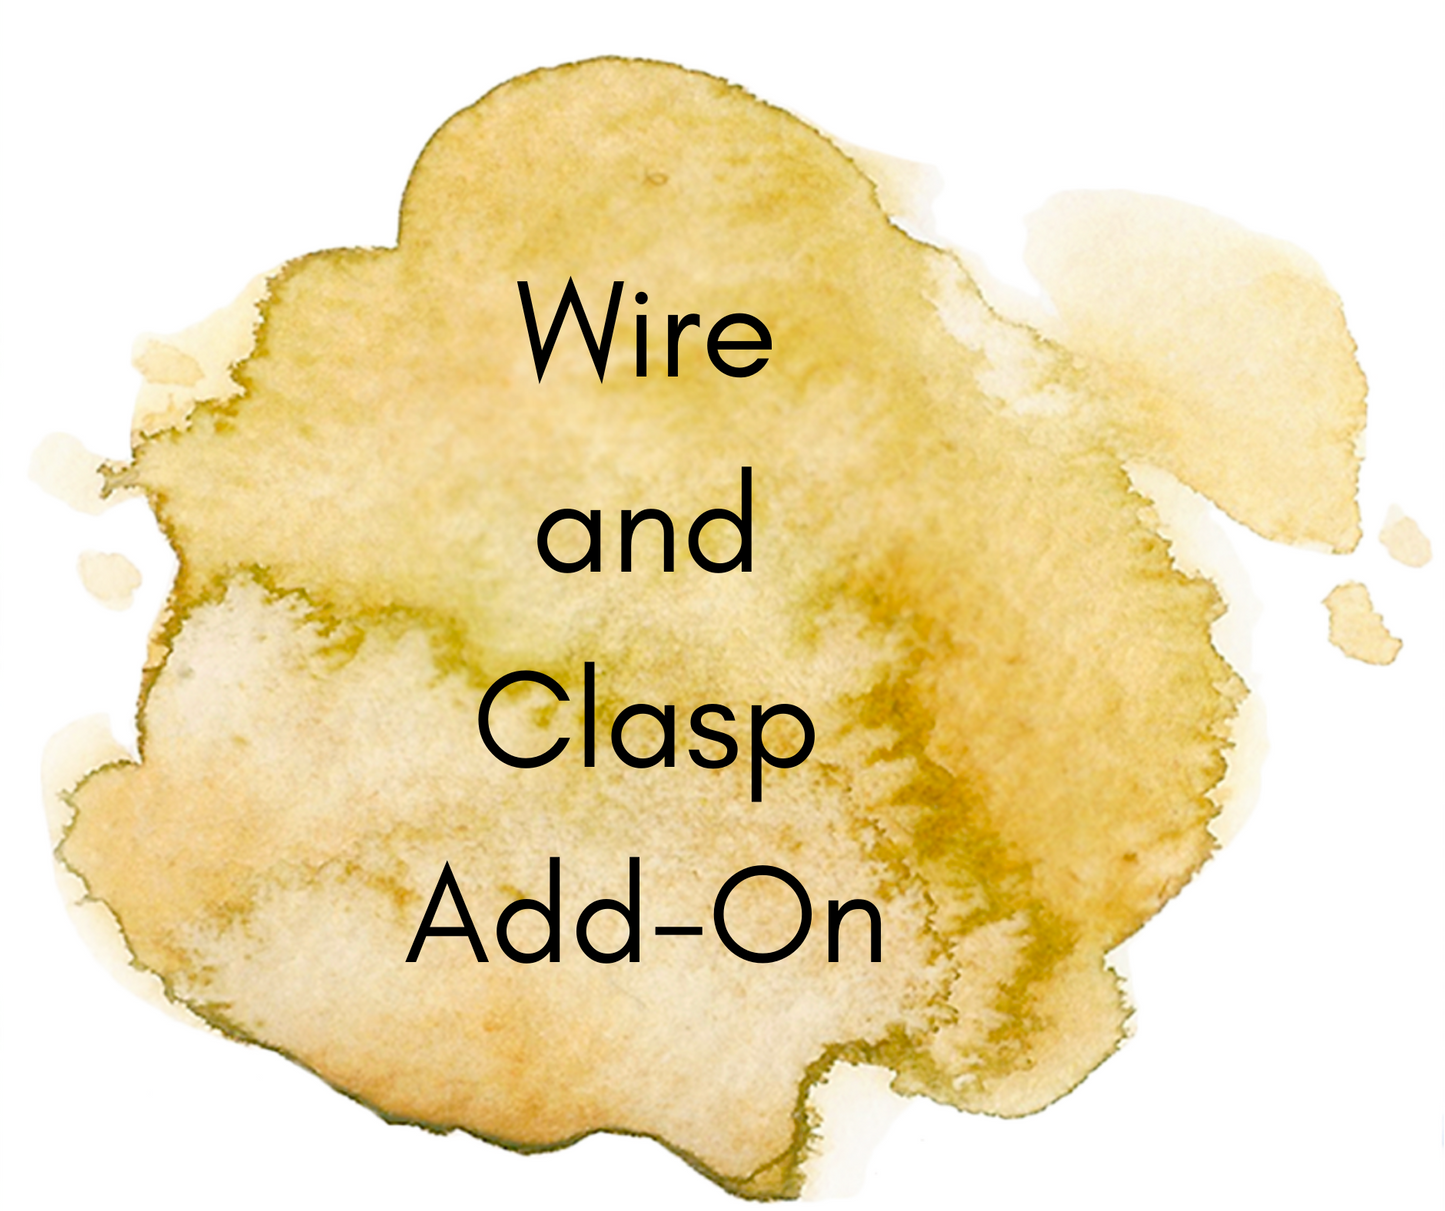 Wire and Clasp Add-On